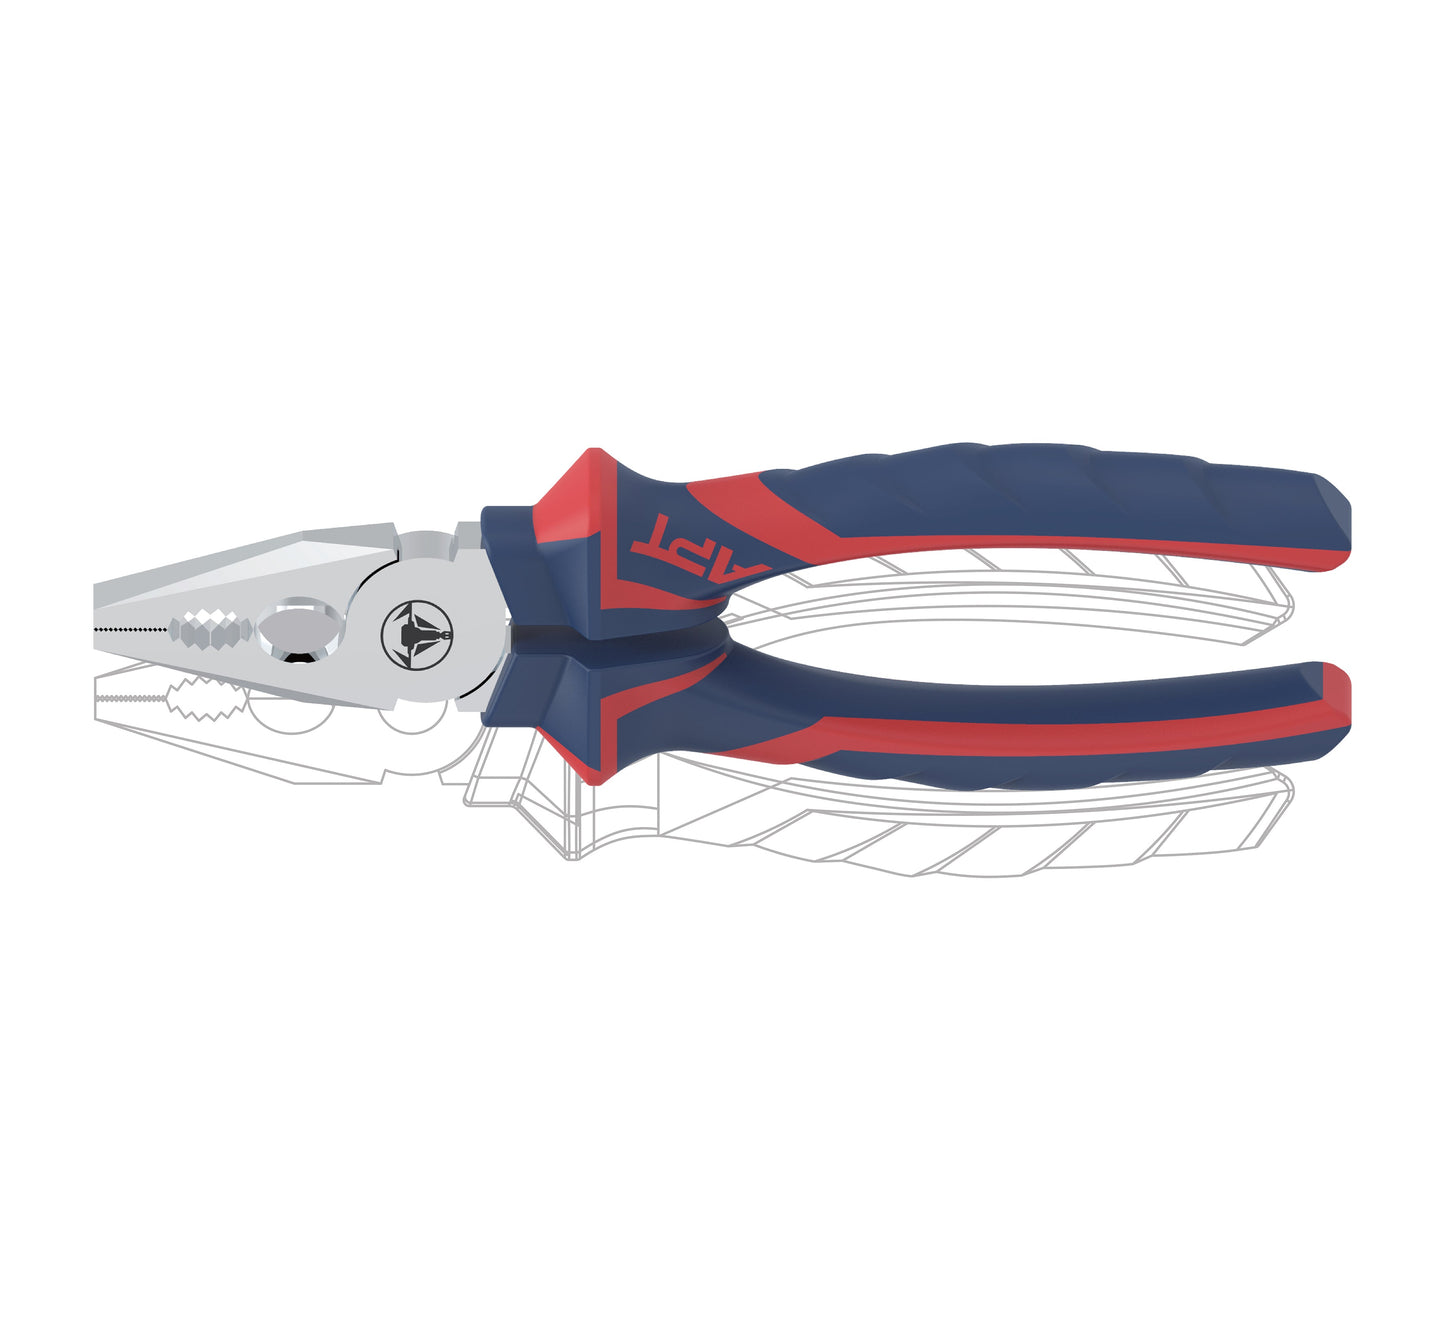 APT COMBINATION PLIER NEW APT 2 COLOR HANDLE PP CARD NICKEL PLATED 150MM-NEW APT PP CARD WITH RED STRAP AH1403540-150